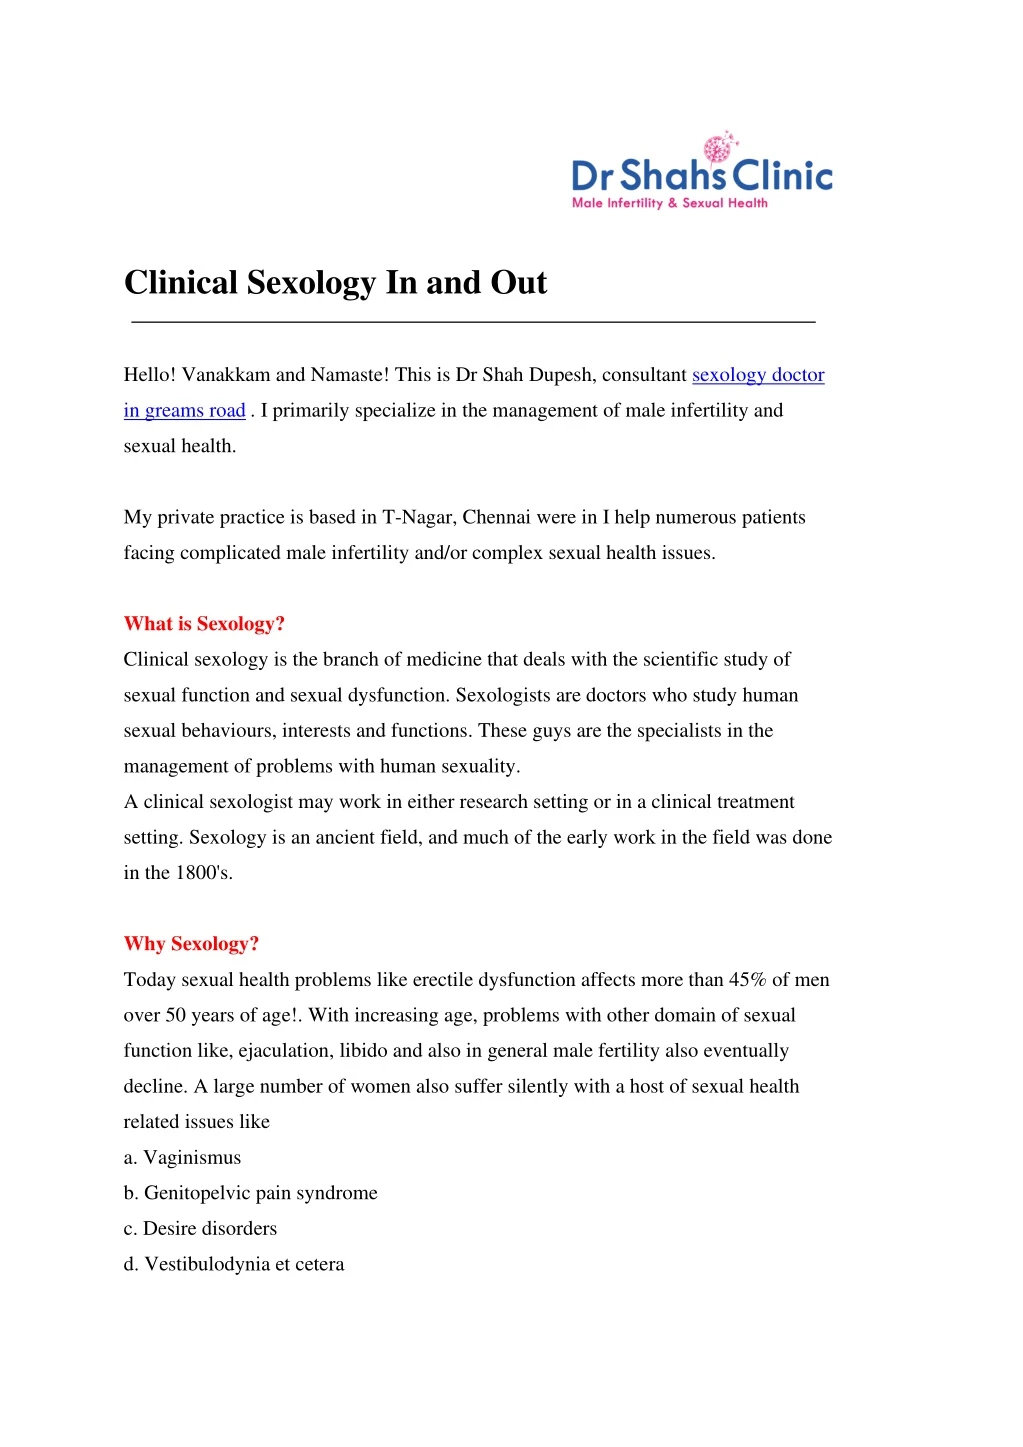 clinical sexology in and out